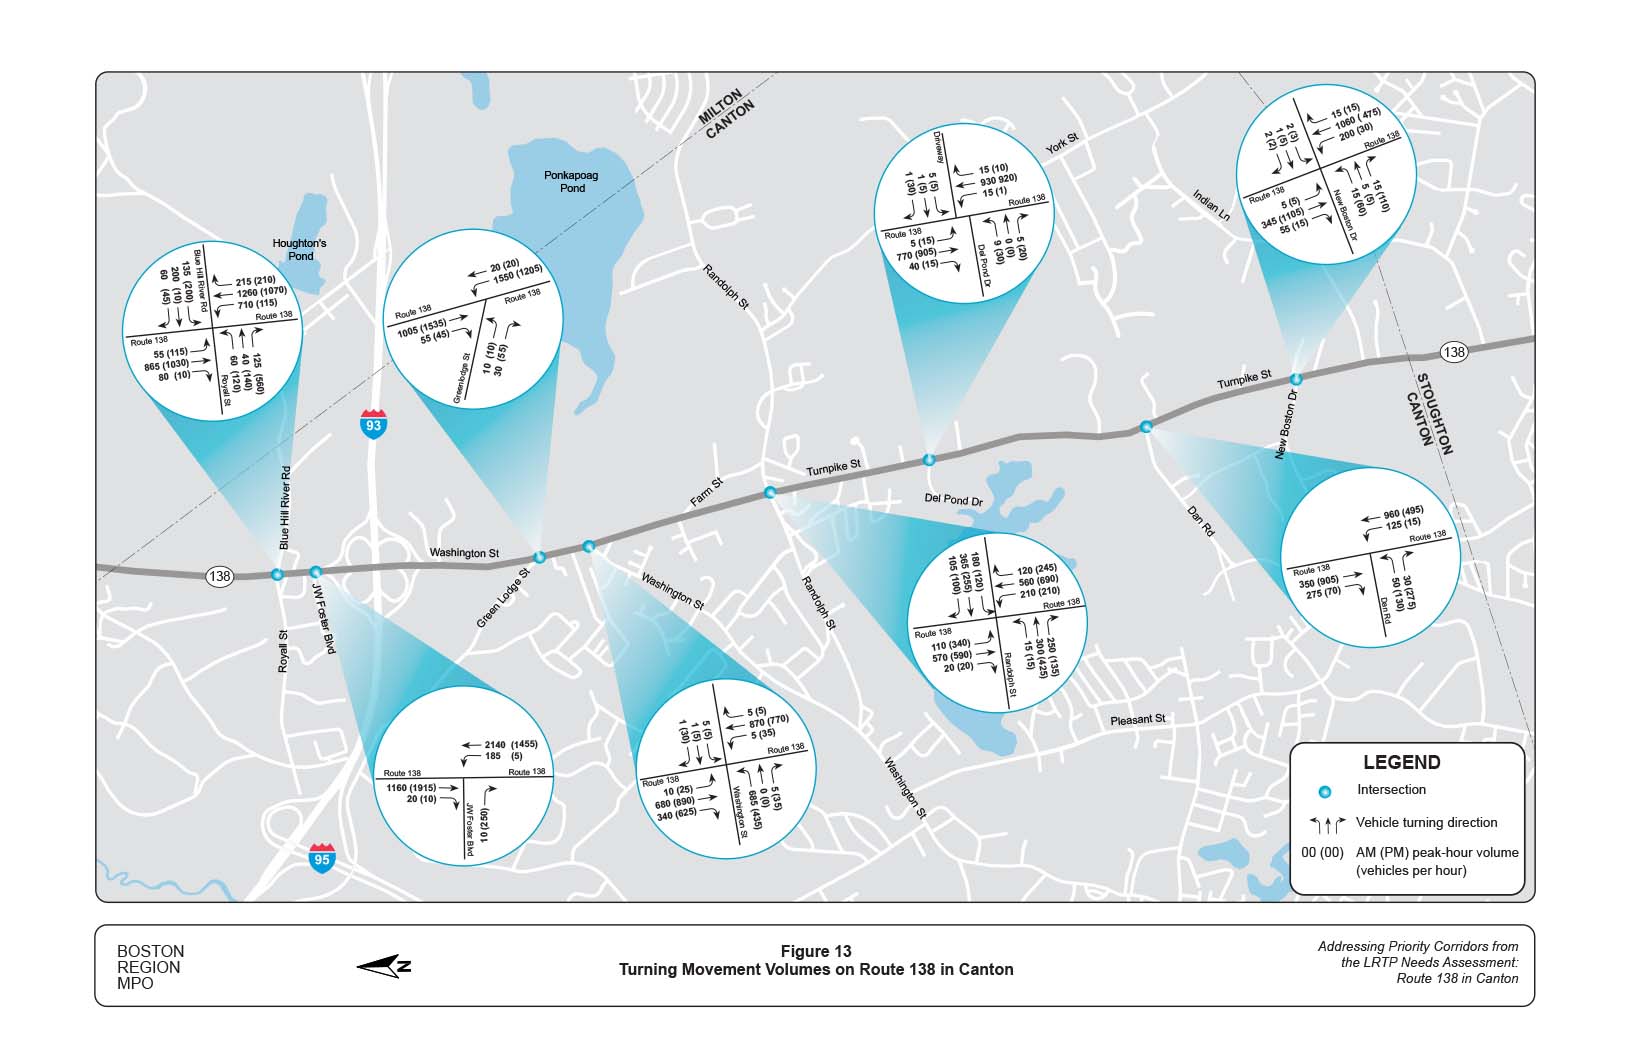 Figure 13 is a map of the study area showing turning movement volumes on Route 138.